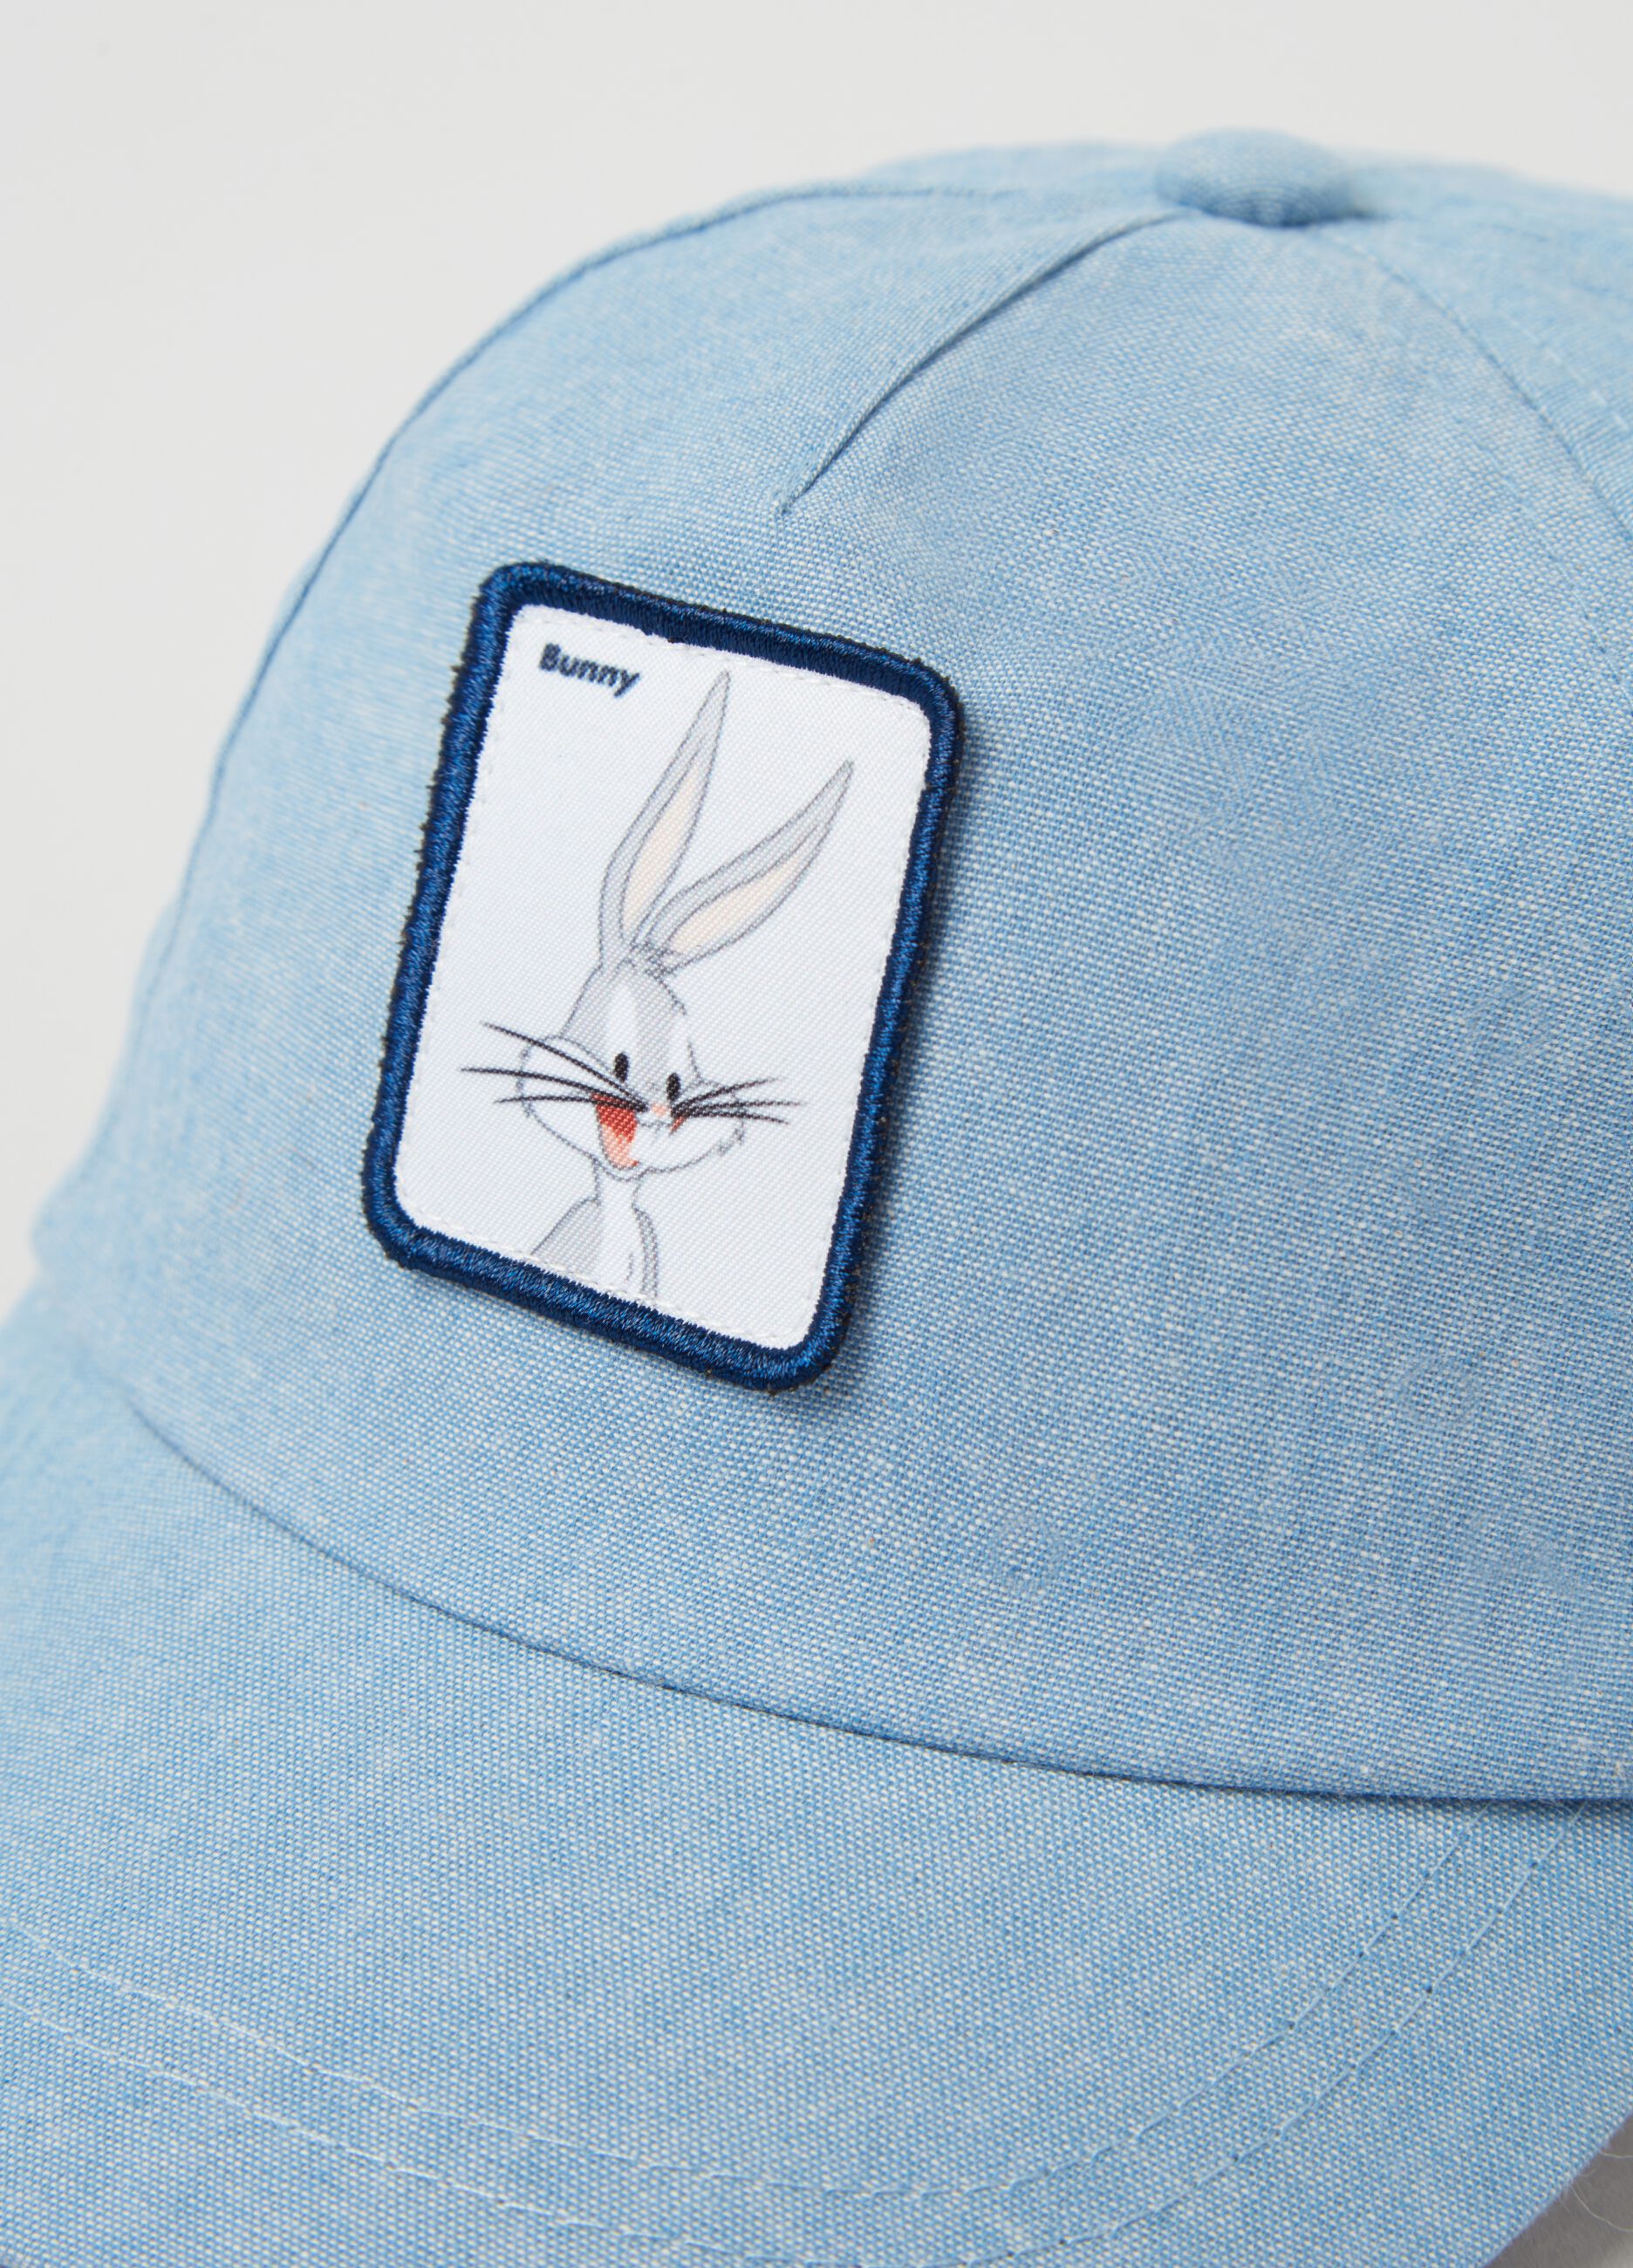 Baseball cap with Bugs Bunny patch